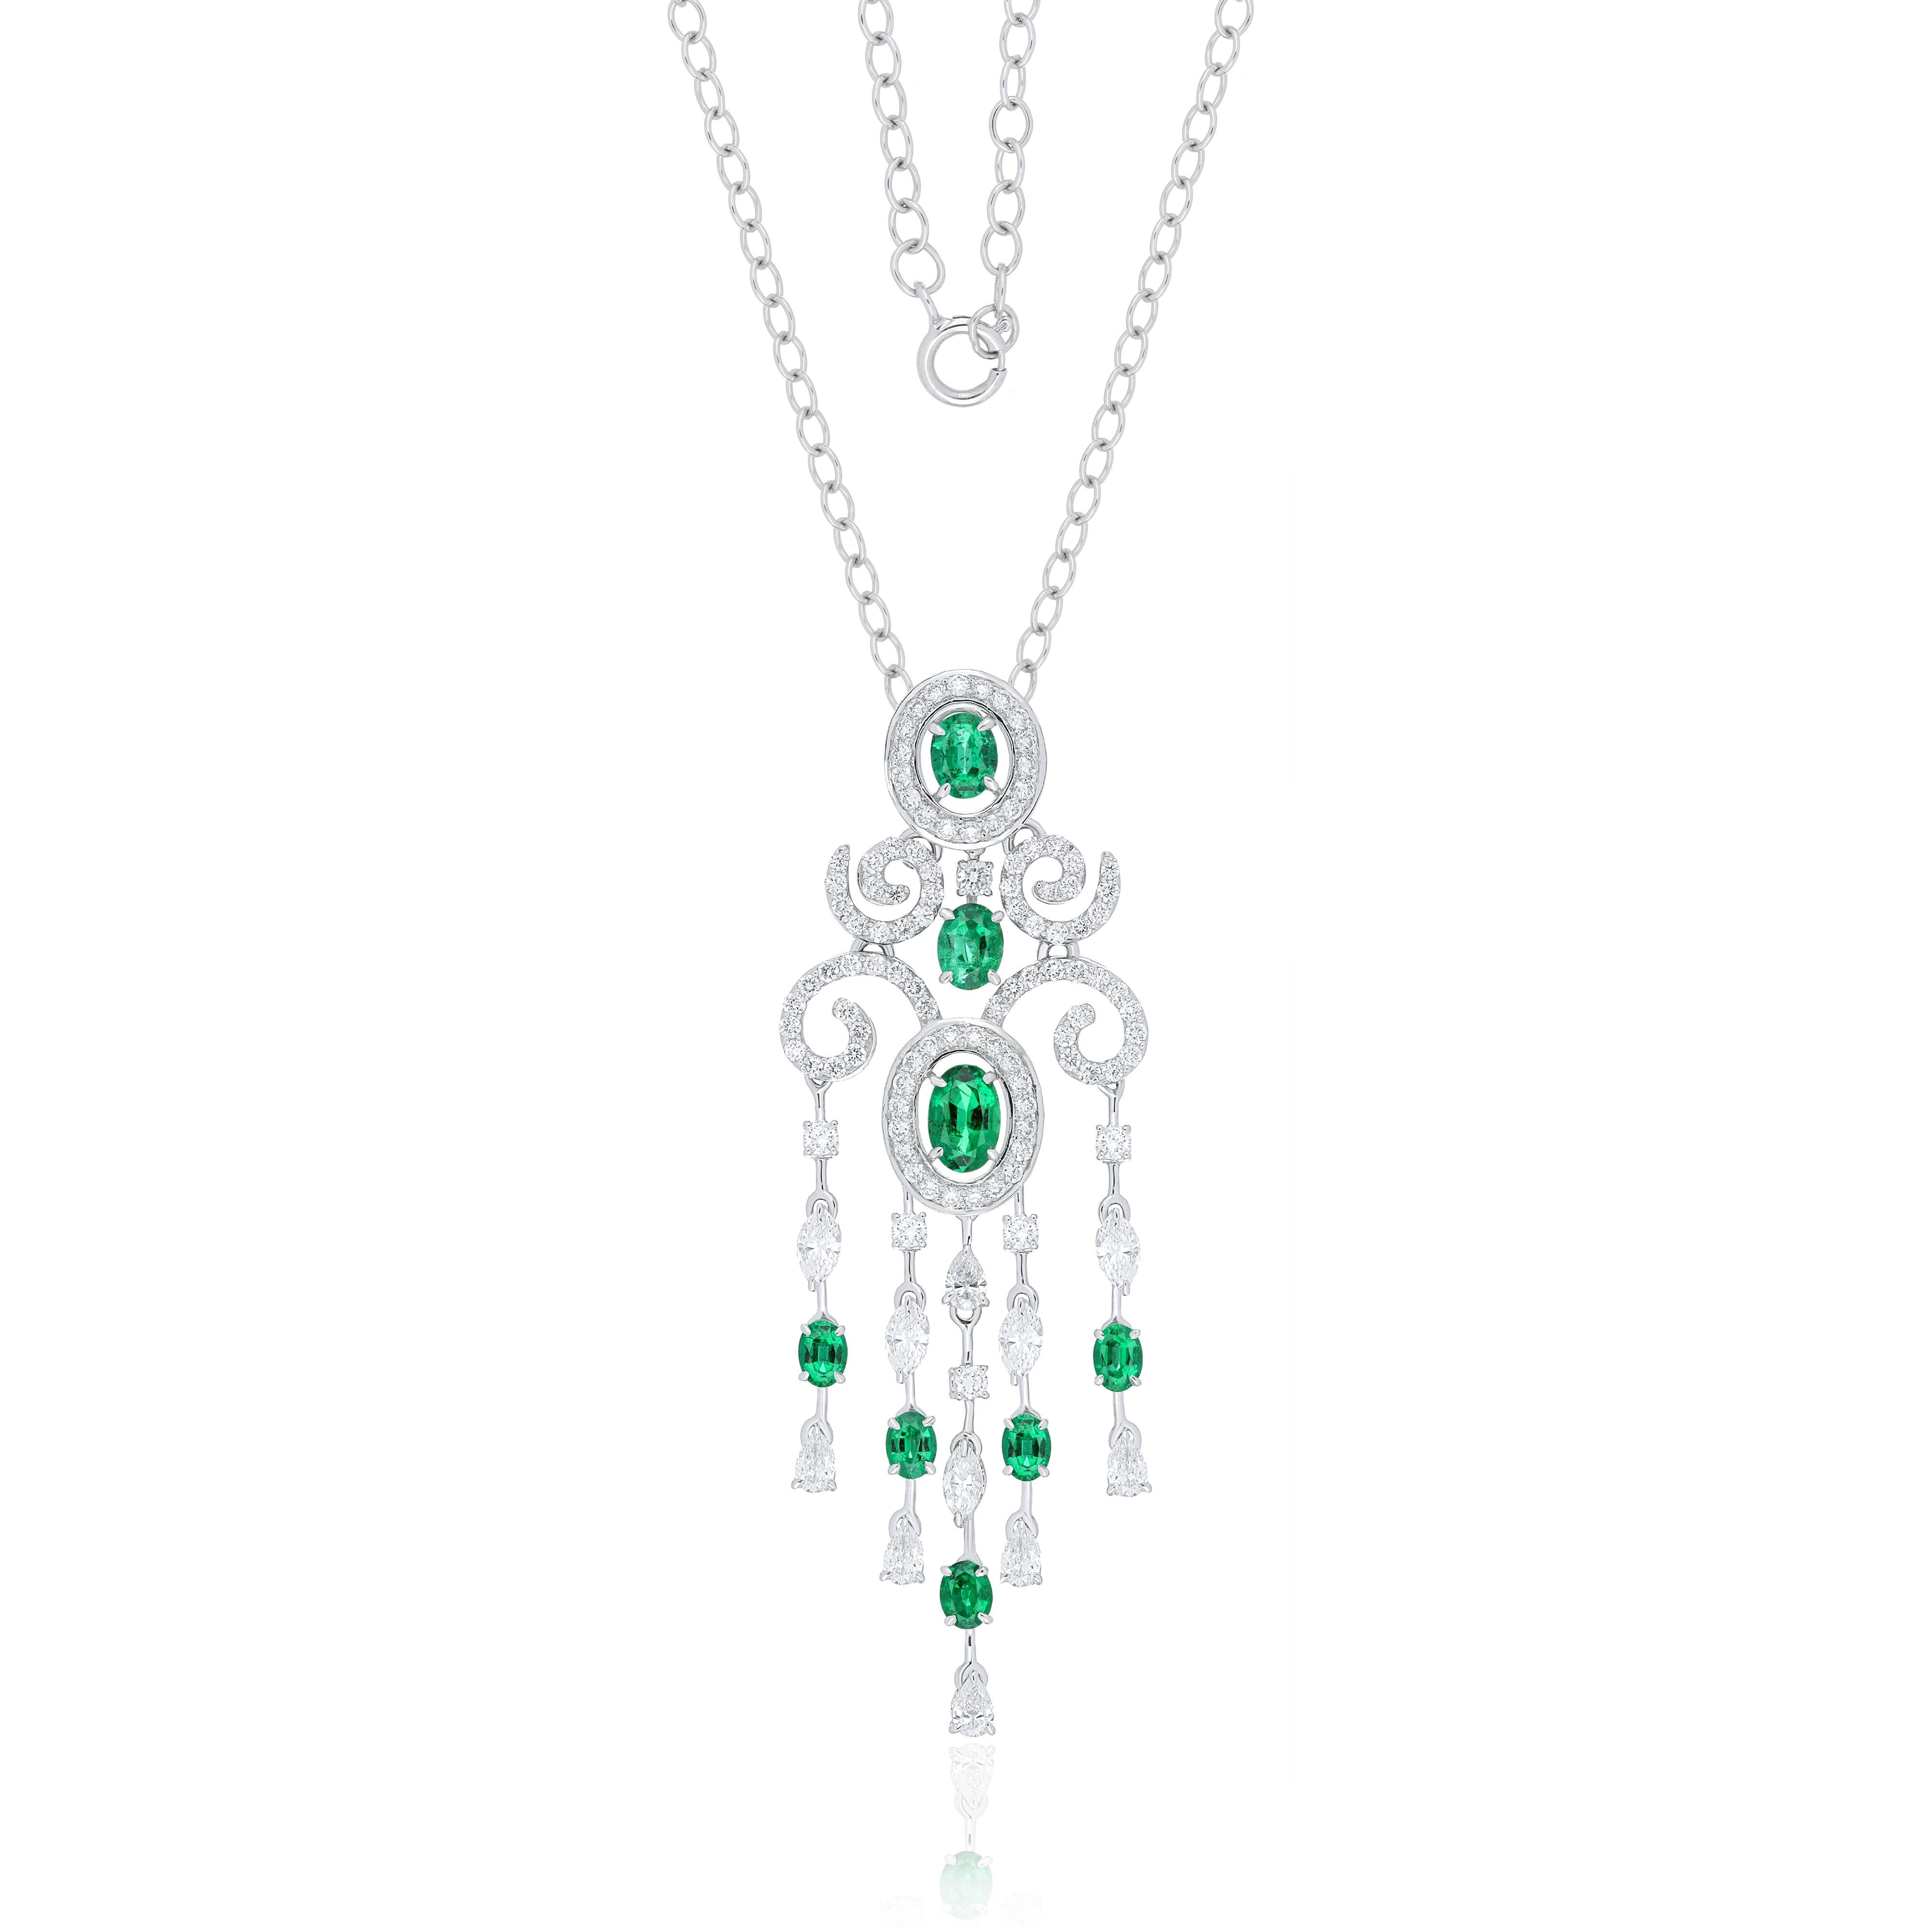 Oval Cut Emerald And Diamond Necklace 18 Karat White Gold jewelry, handcraft Pendant For Sale